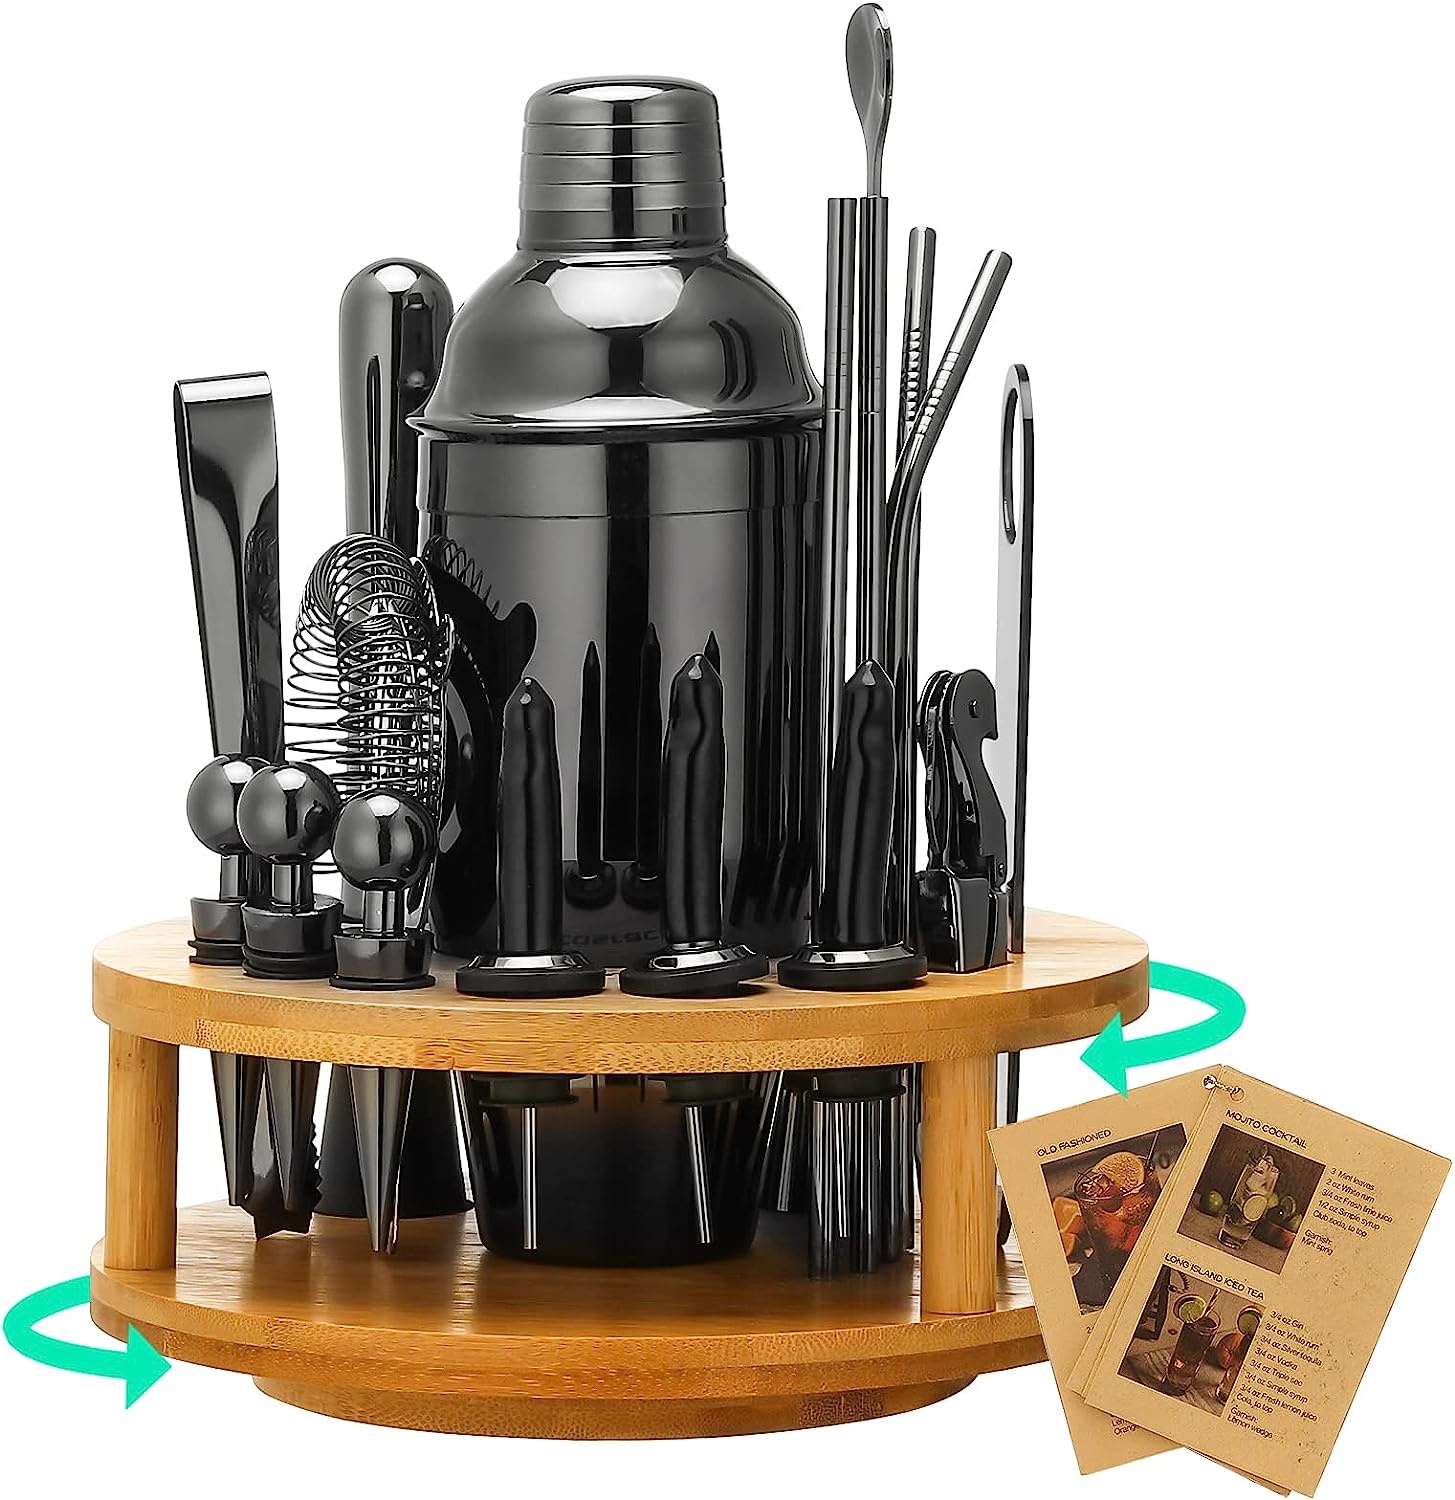 Which set to buy? Its my first time buying a cocktail set. : r/cocktails